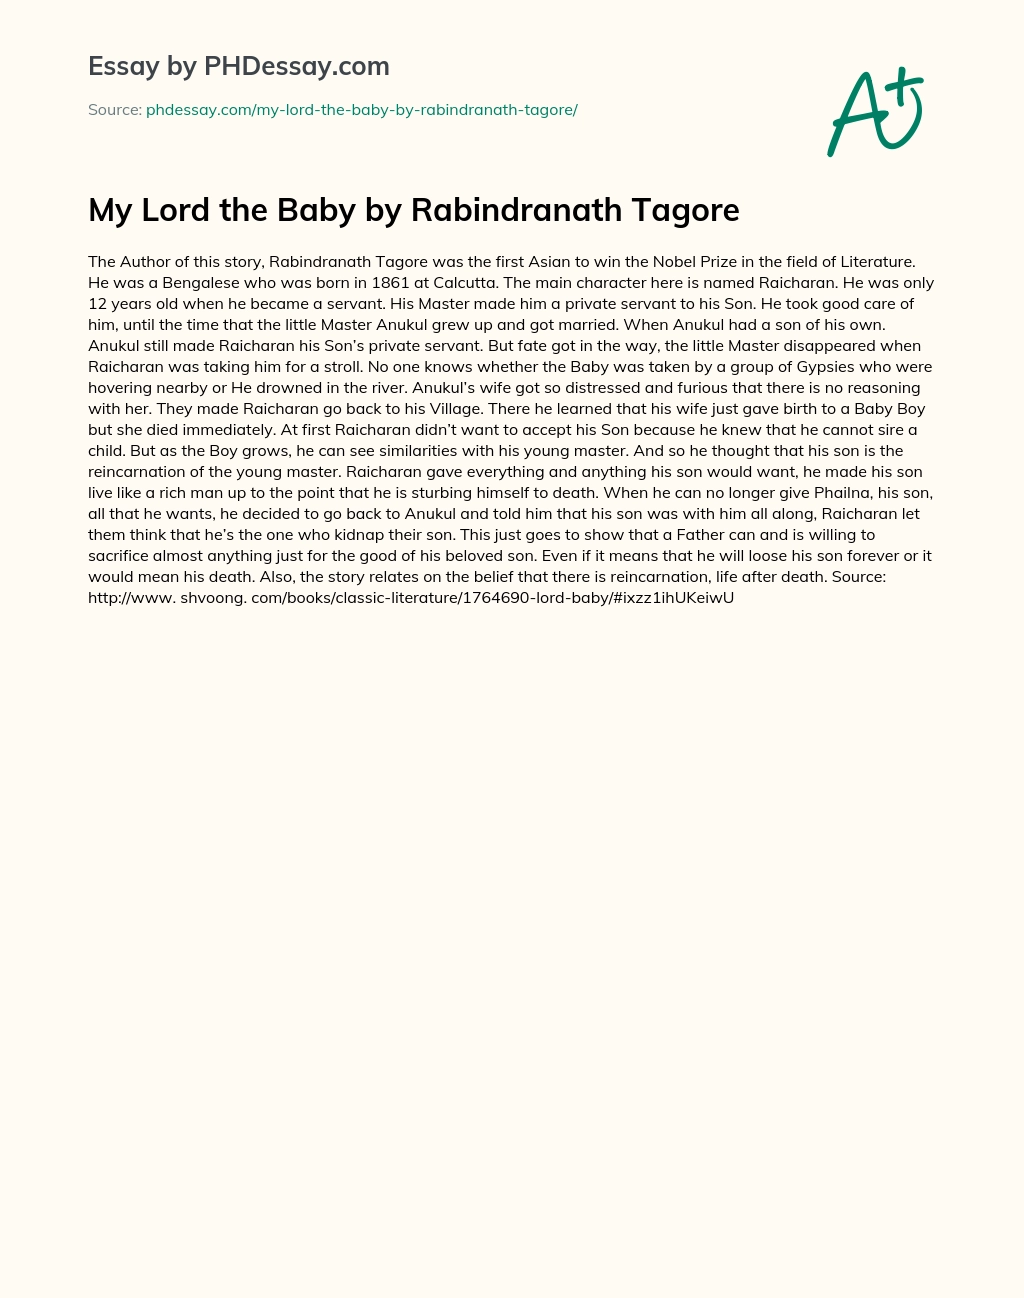 My Lord the Baby by Rabindranath Tagore essay